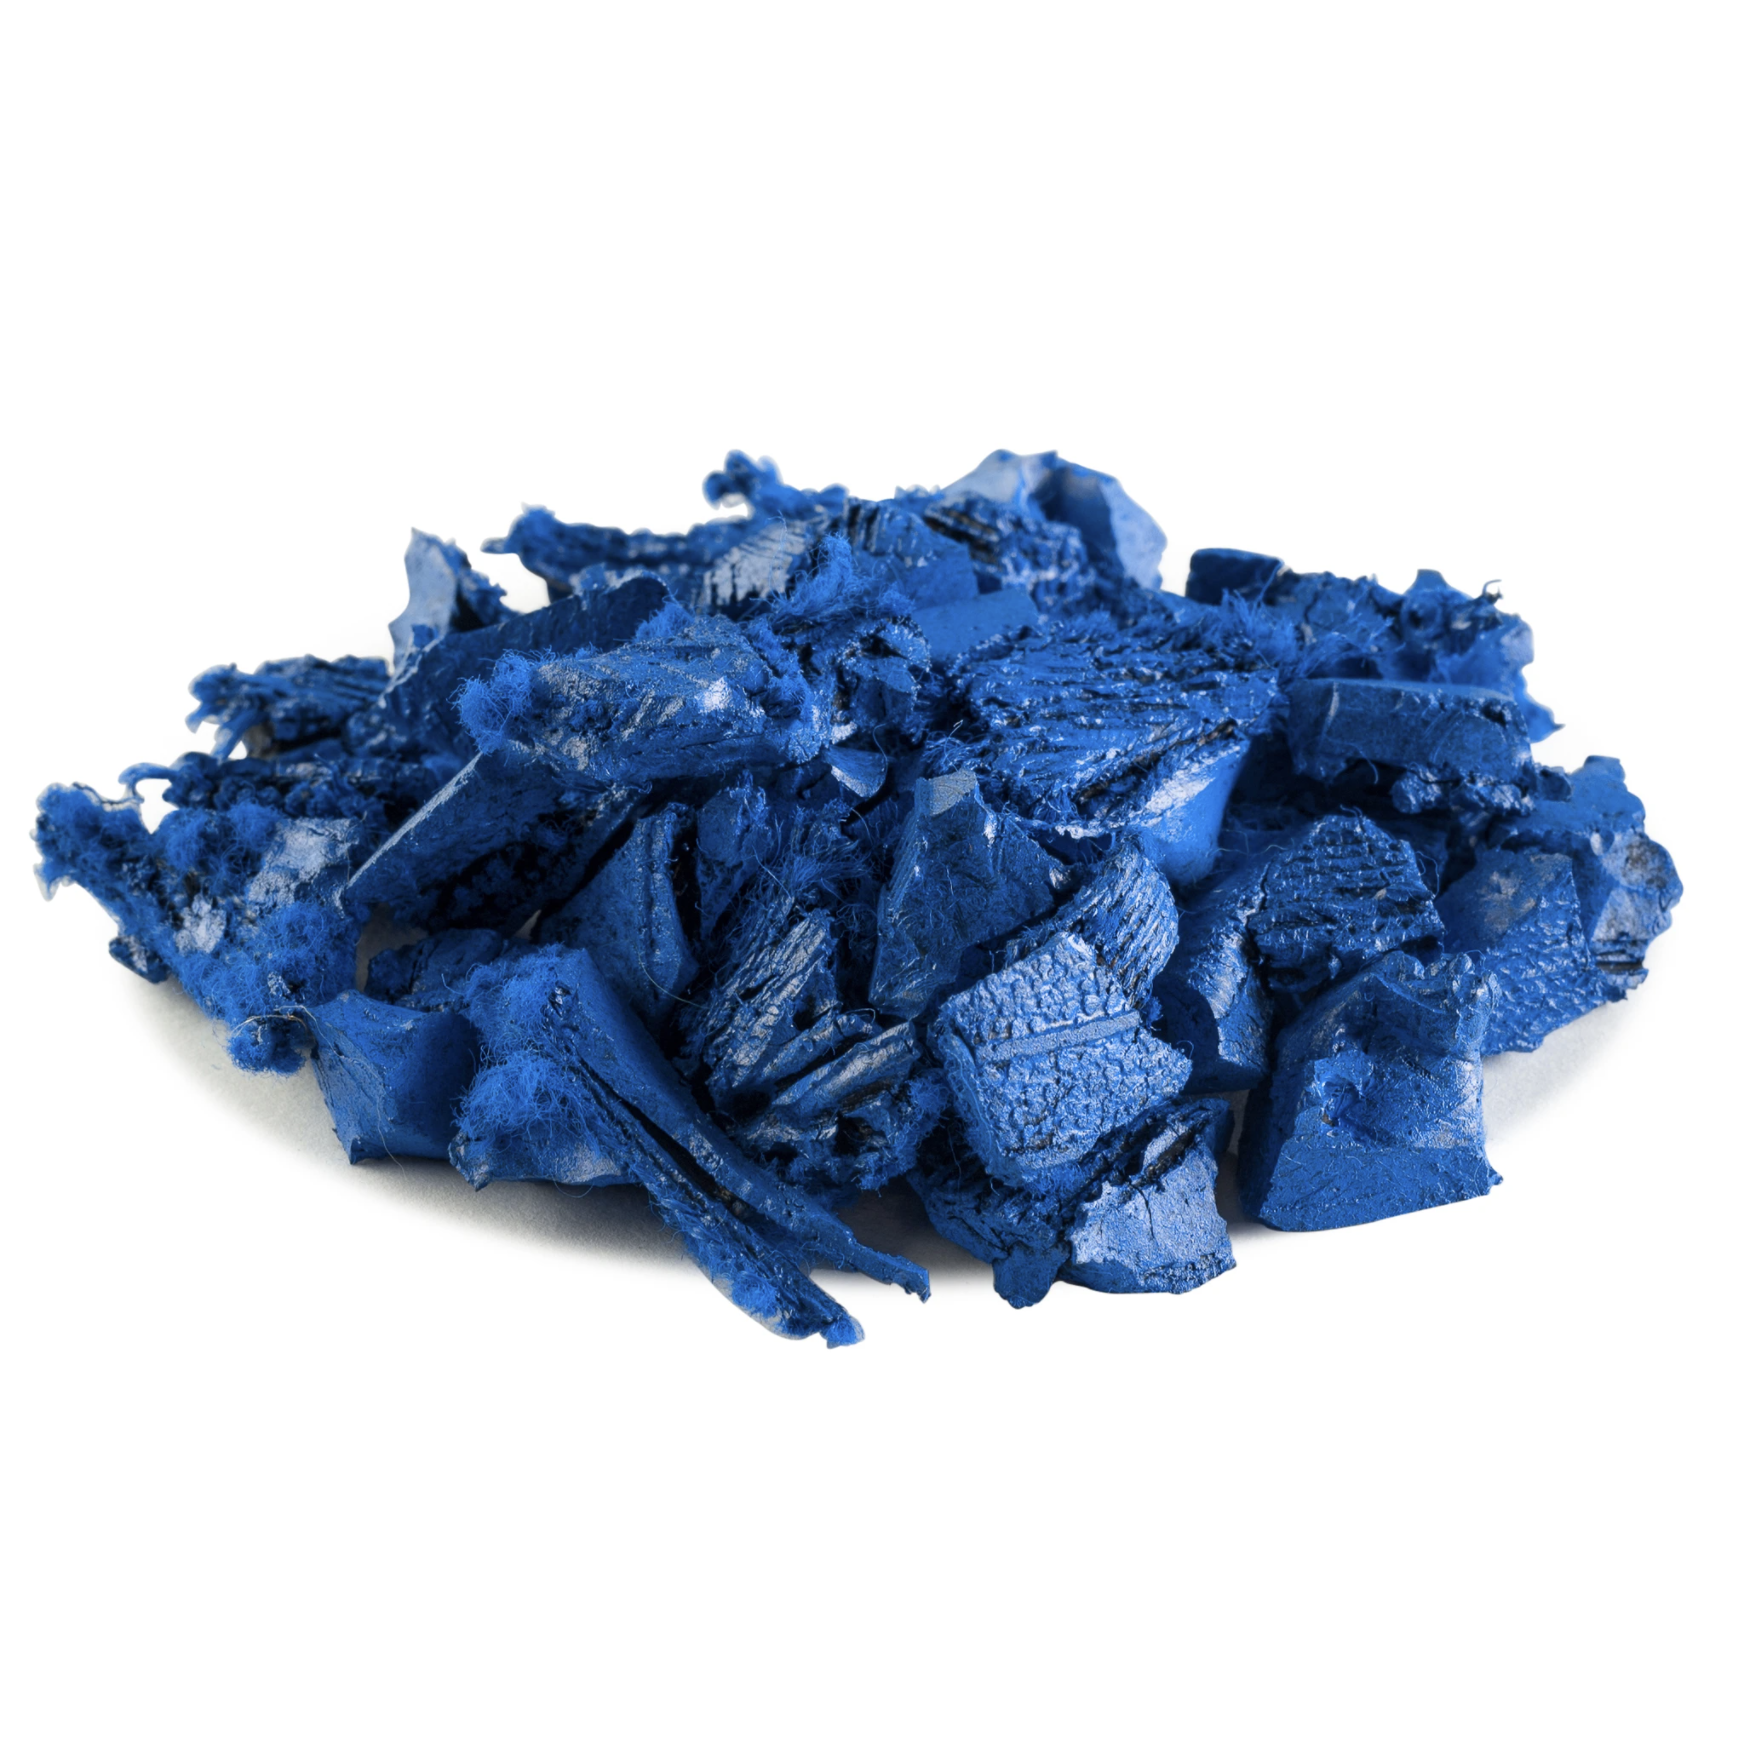 Playsafer Recycled Royal Blue Rubber Mulch Natural/ Unpainted (50 Single 39 lbs Bags)